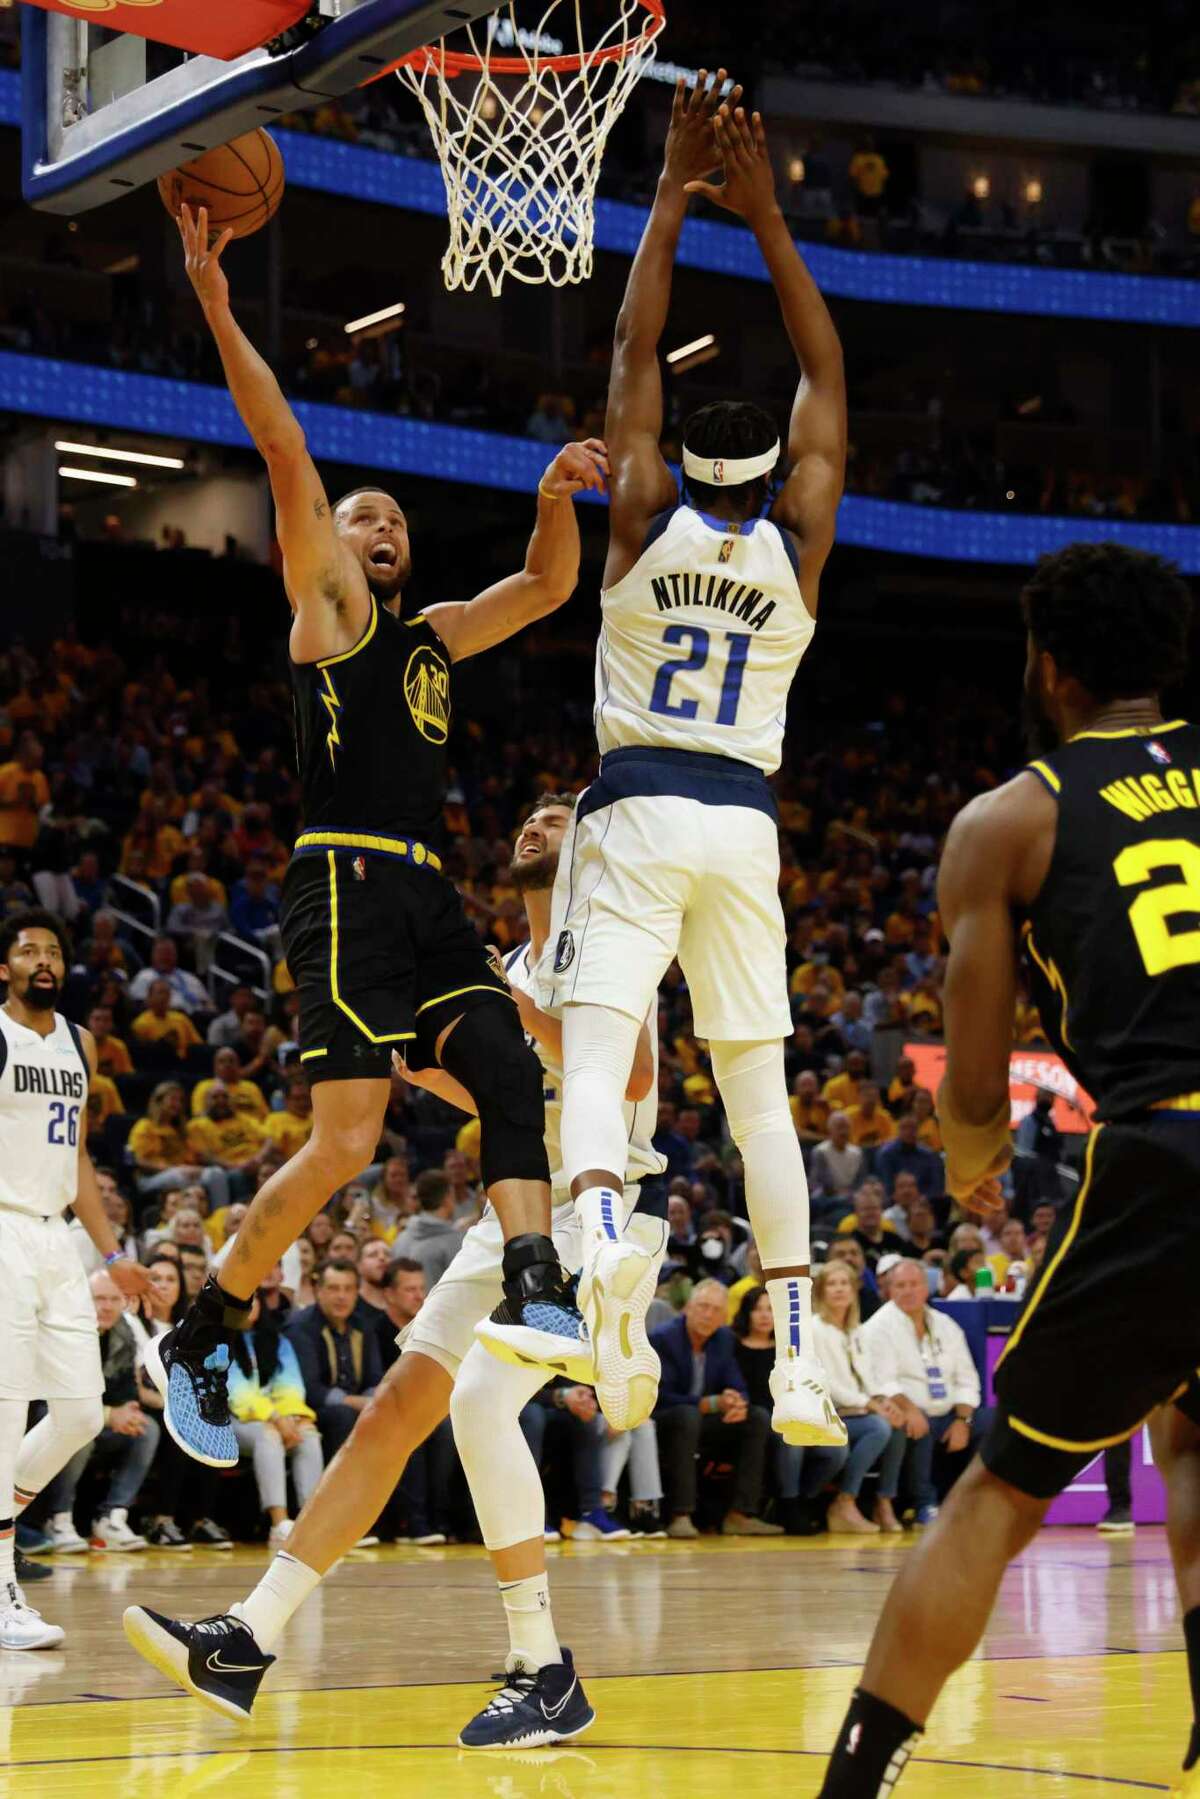 Golden State Warriors' guard Stephen Curry drives towards the basket as Dallas Mavericks’ guard Frank Ntilikina defends during the second quarter in Game 5 of the NBA basketball playoffs Western Conference finals in San Francisco, Calif. Thursday, May 26, 2022.